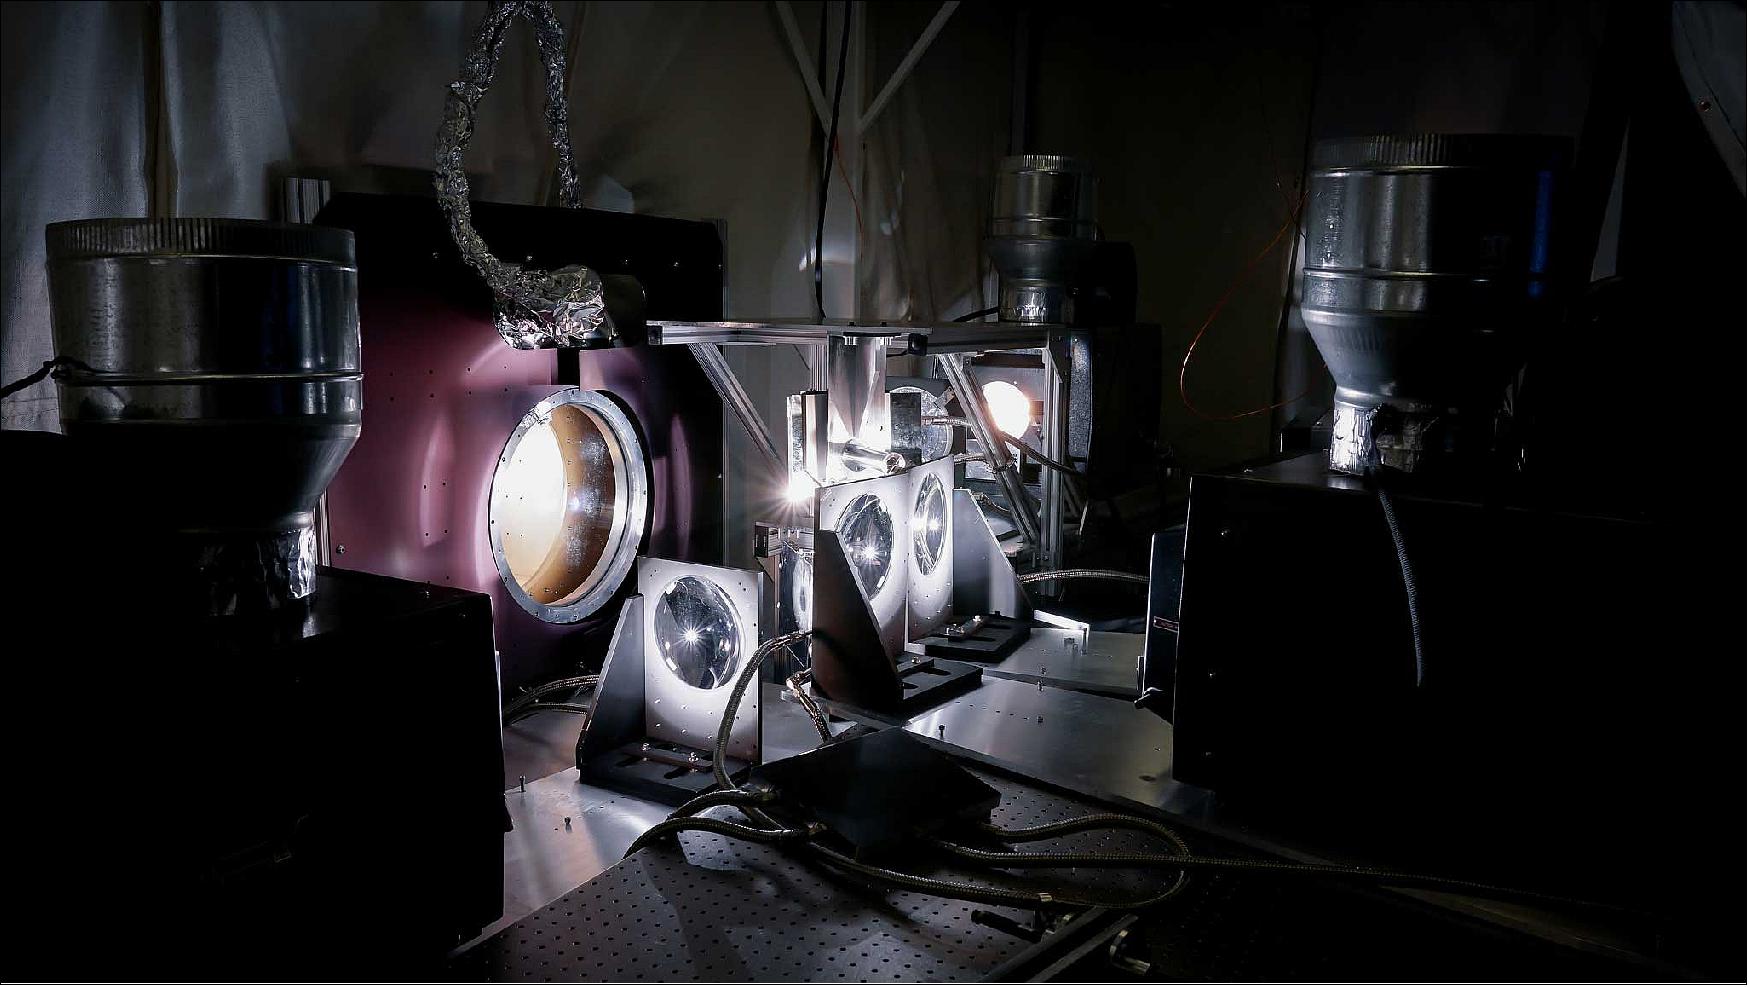 Figure 124: Researchers use a quartet of IMAX projectors to create the light and heat the Parker Solar Probe cup will experience during its trips through the sun's atmosphere. The cup sits inside a vacuum chambers set up in a lab at the Smithsonian Astrophysical Observatory in Cambridge, Massachusetts (image credit: Levi Hutmacher, Michigan Engineering)